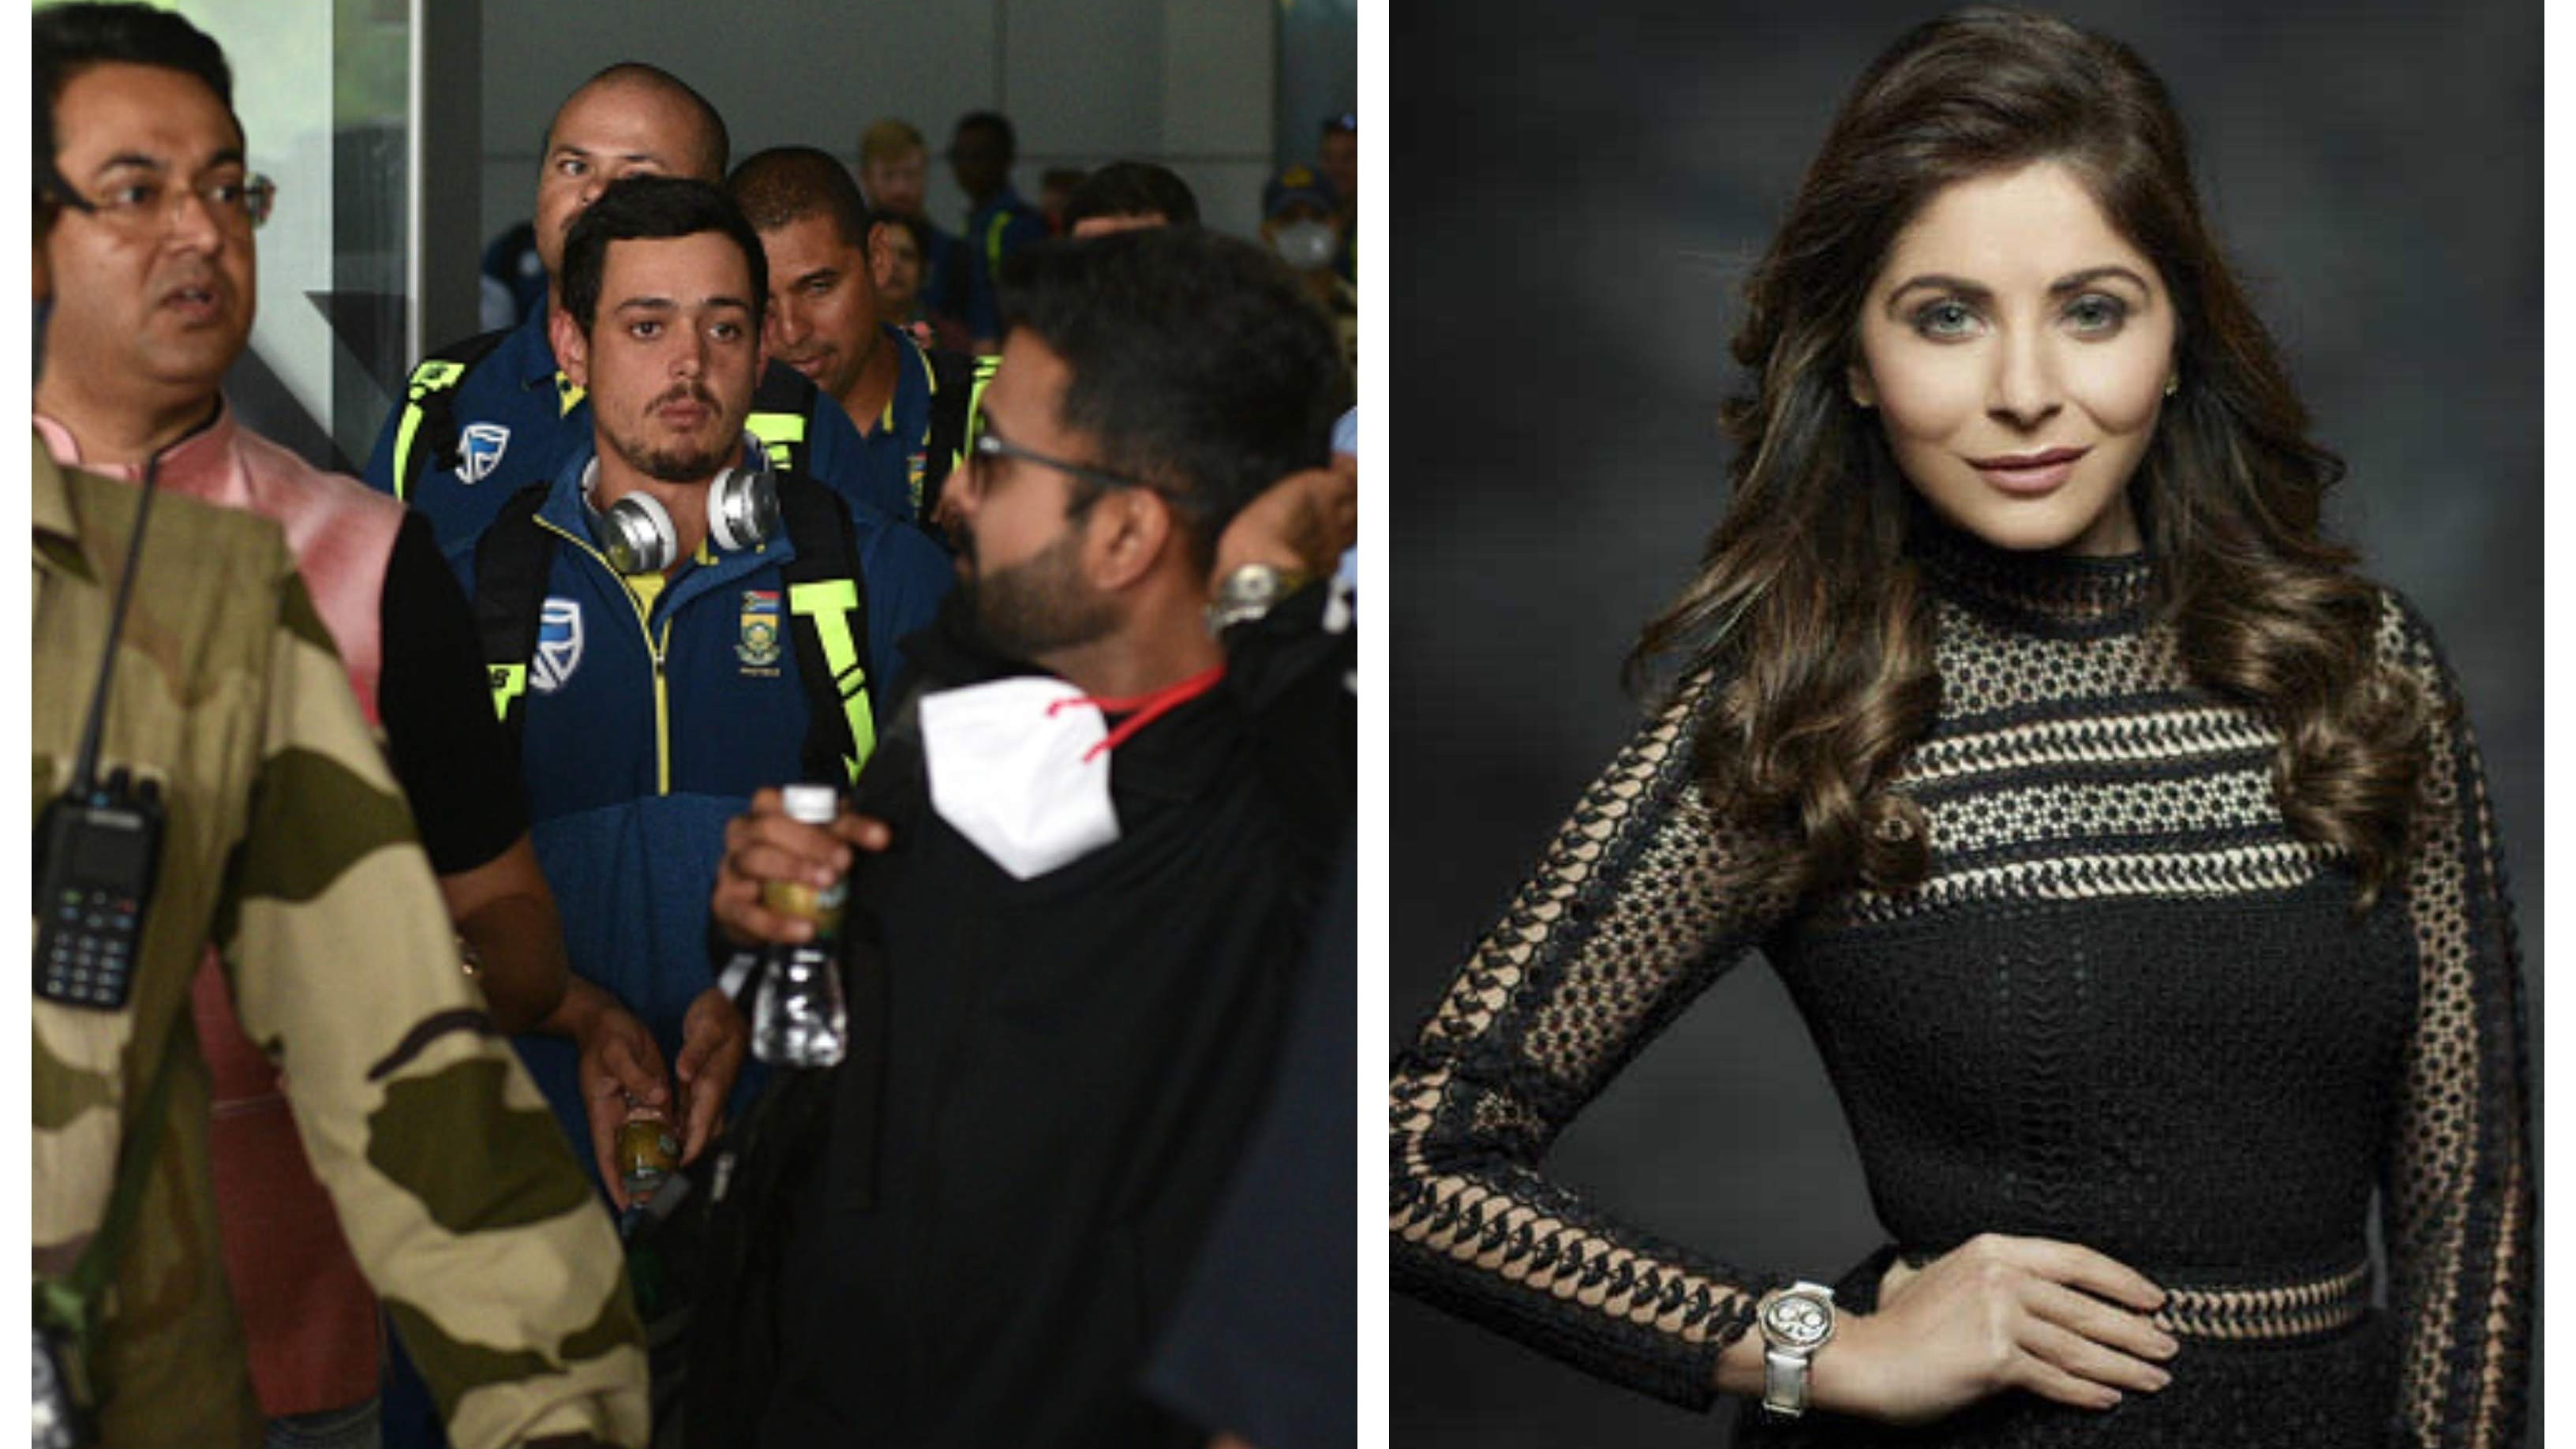 IND v SA 2020: Proteas team shared same hotel as COVID-19 affected Indian singer Kanika Kapoor in Lucknow